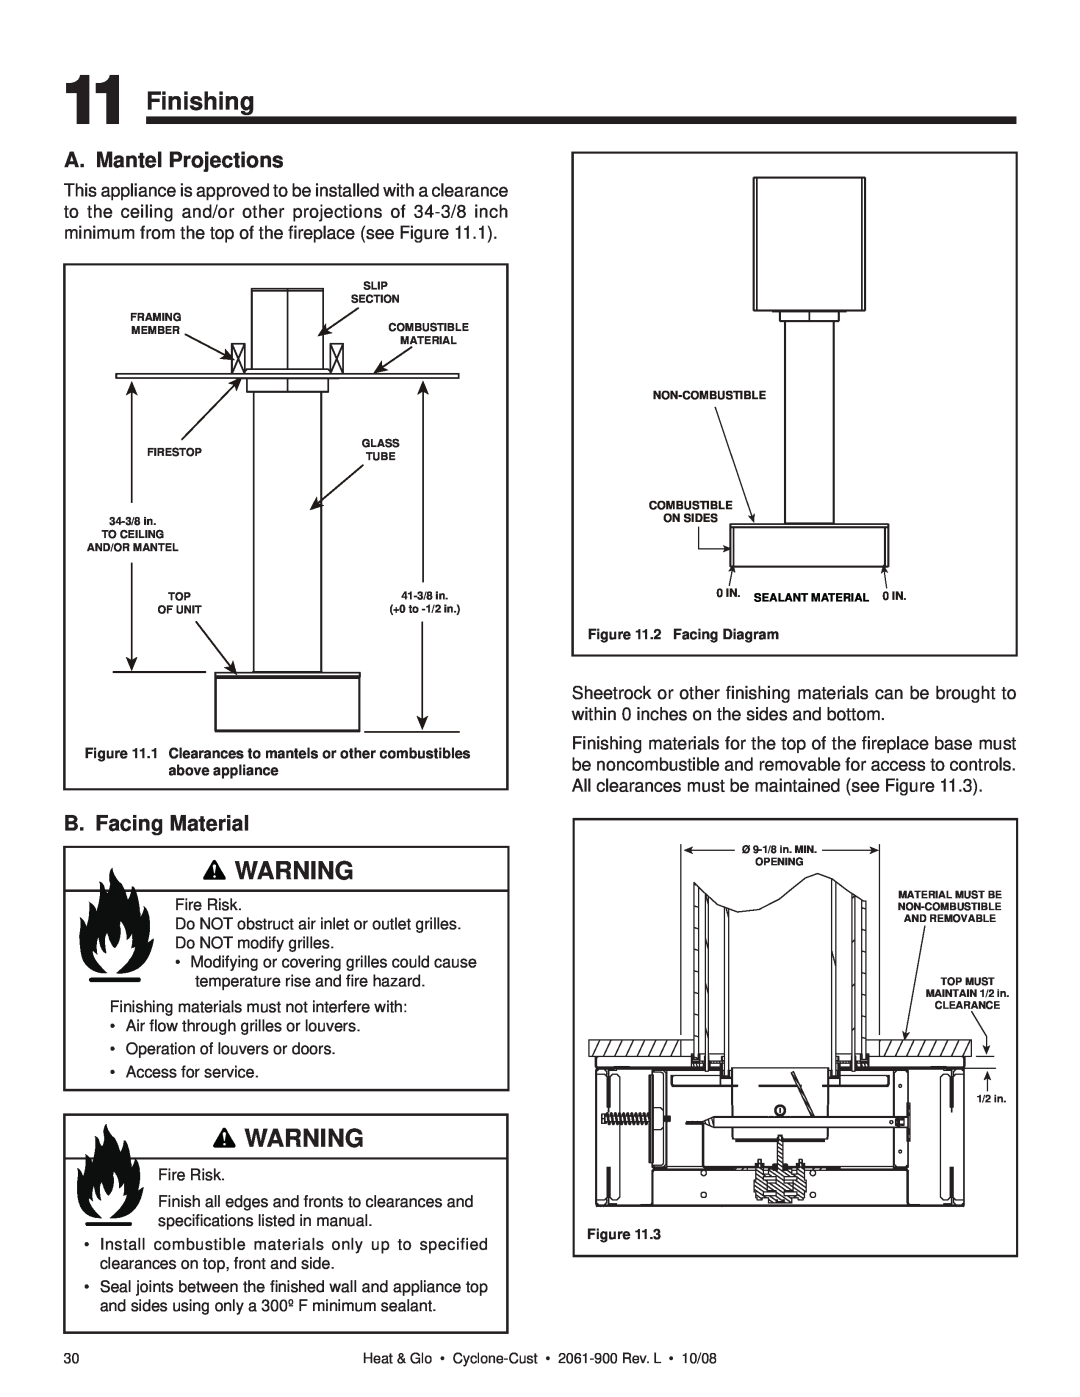 Hearth and Home Technologies Cyclone-Cust owner manual Finishing, A. Mantel Projections, B. Facing Material 